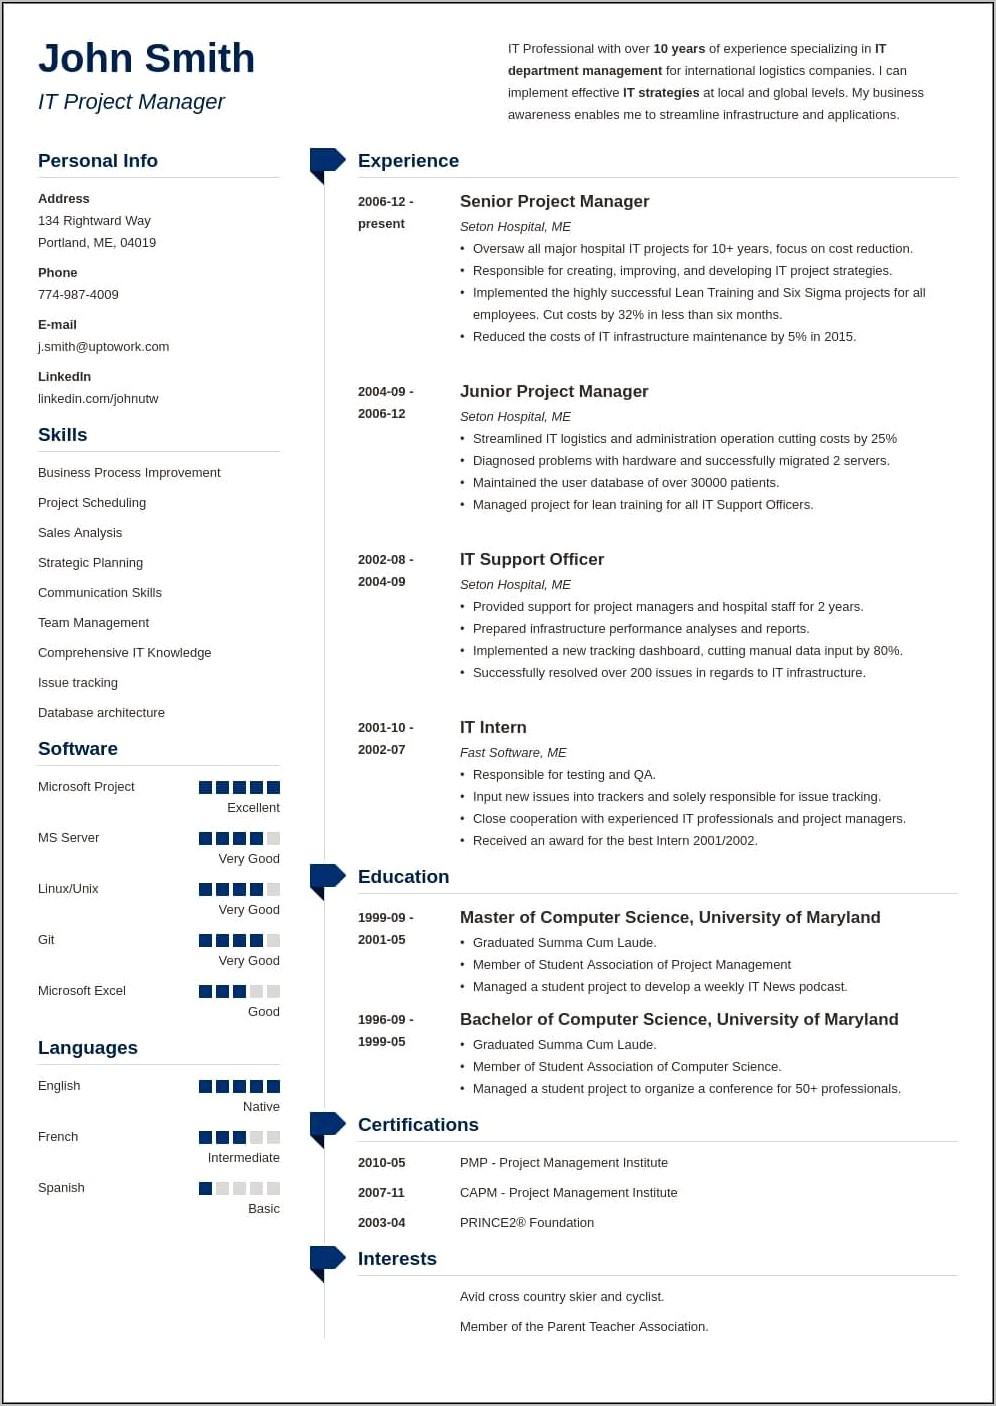 best-free-resume-templates-for-ats-resume-example-gallery